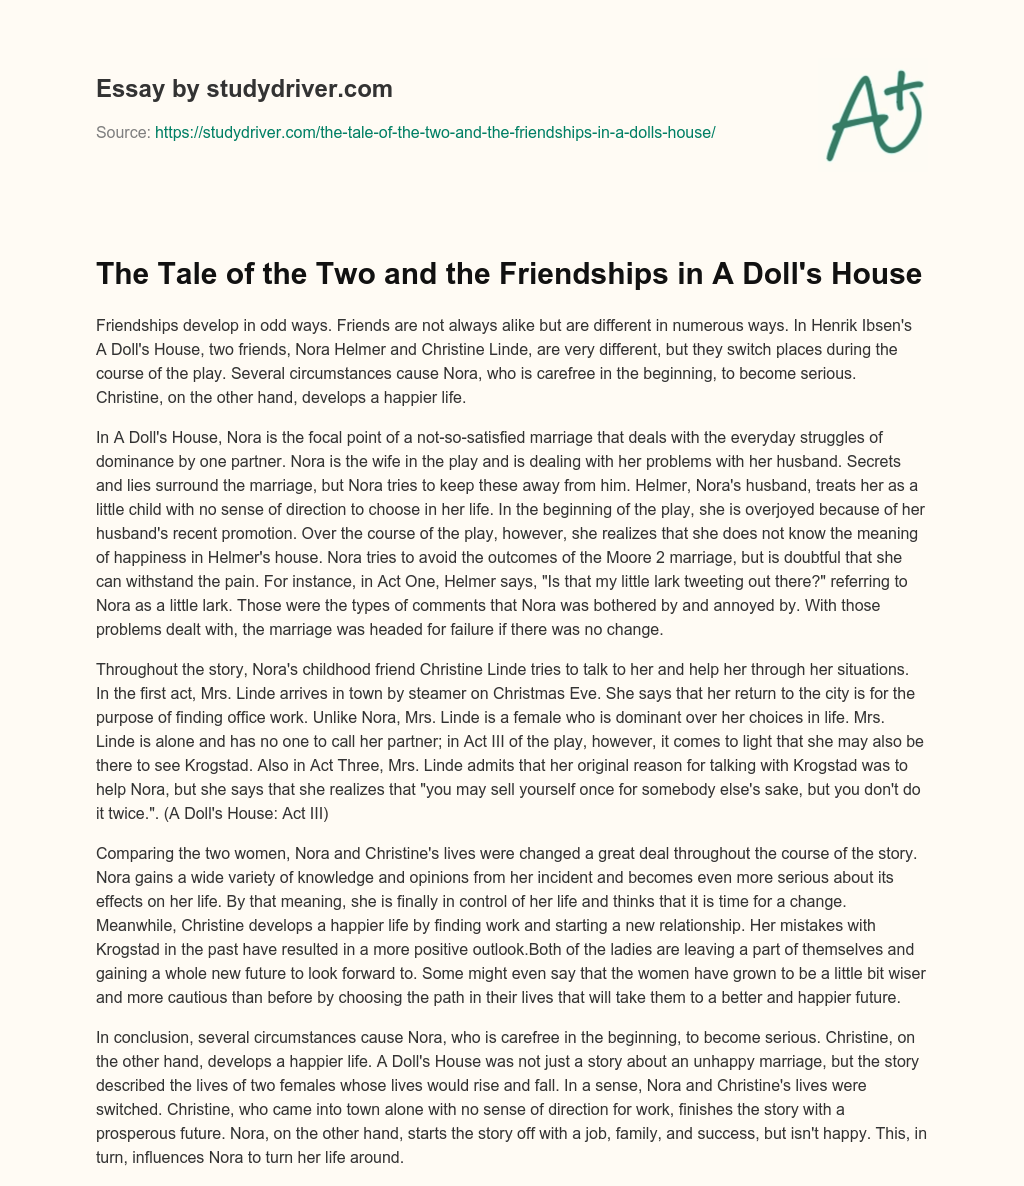 The Tale of the Two and the Friendships in a Doll’s House essay